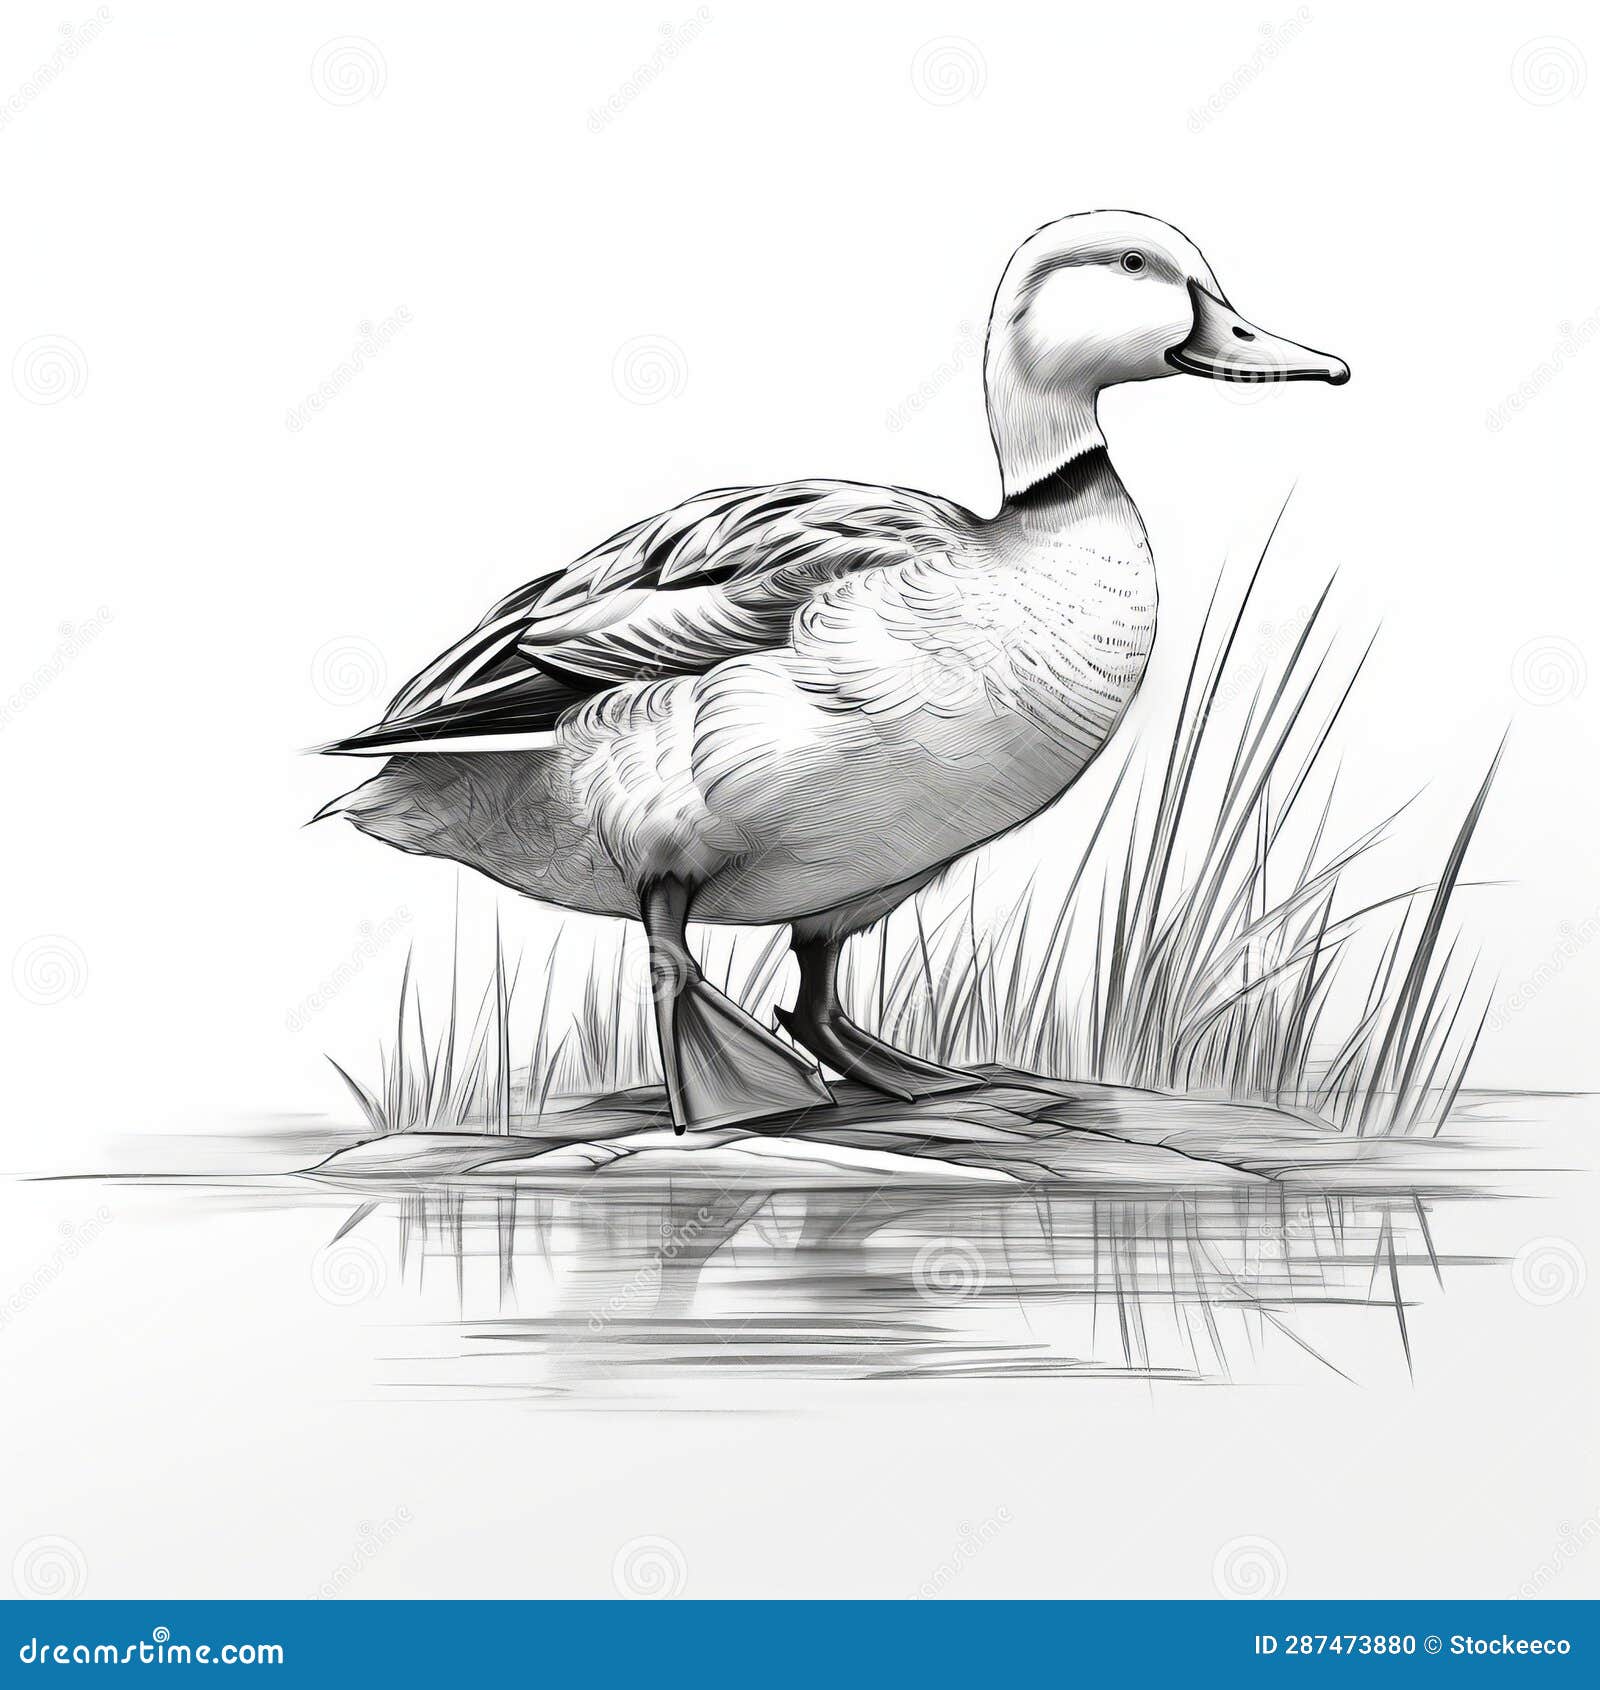 HOW TO DRAW DUCK SCENERY STEP BY STEP/HOW TO DRAW DUCK/EASYSCENERY DRAWING  OF TWO DUCK IN THE RIVER - YouTube